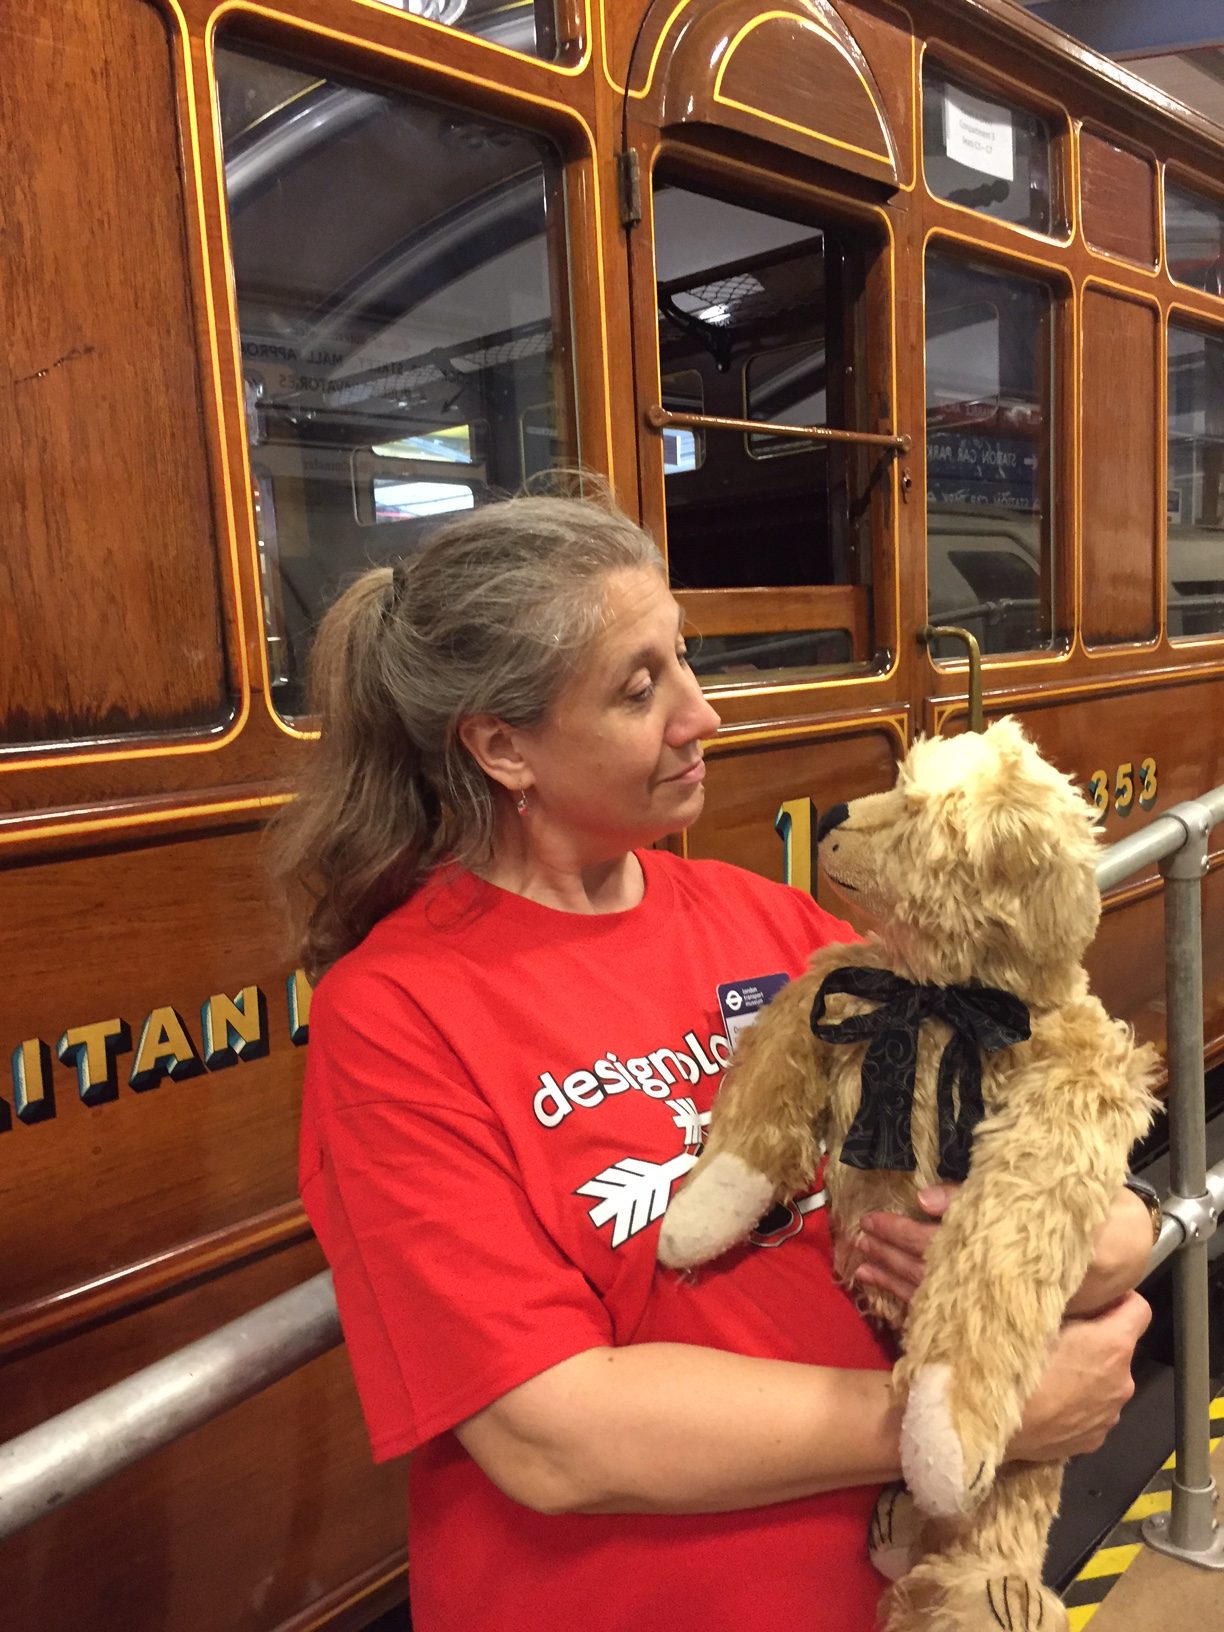 London Transport Museum: Our Second volunteer. Looking after Victorian steam train carriages from the Metropolitan Railway.